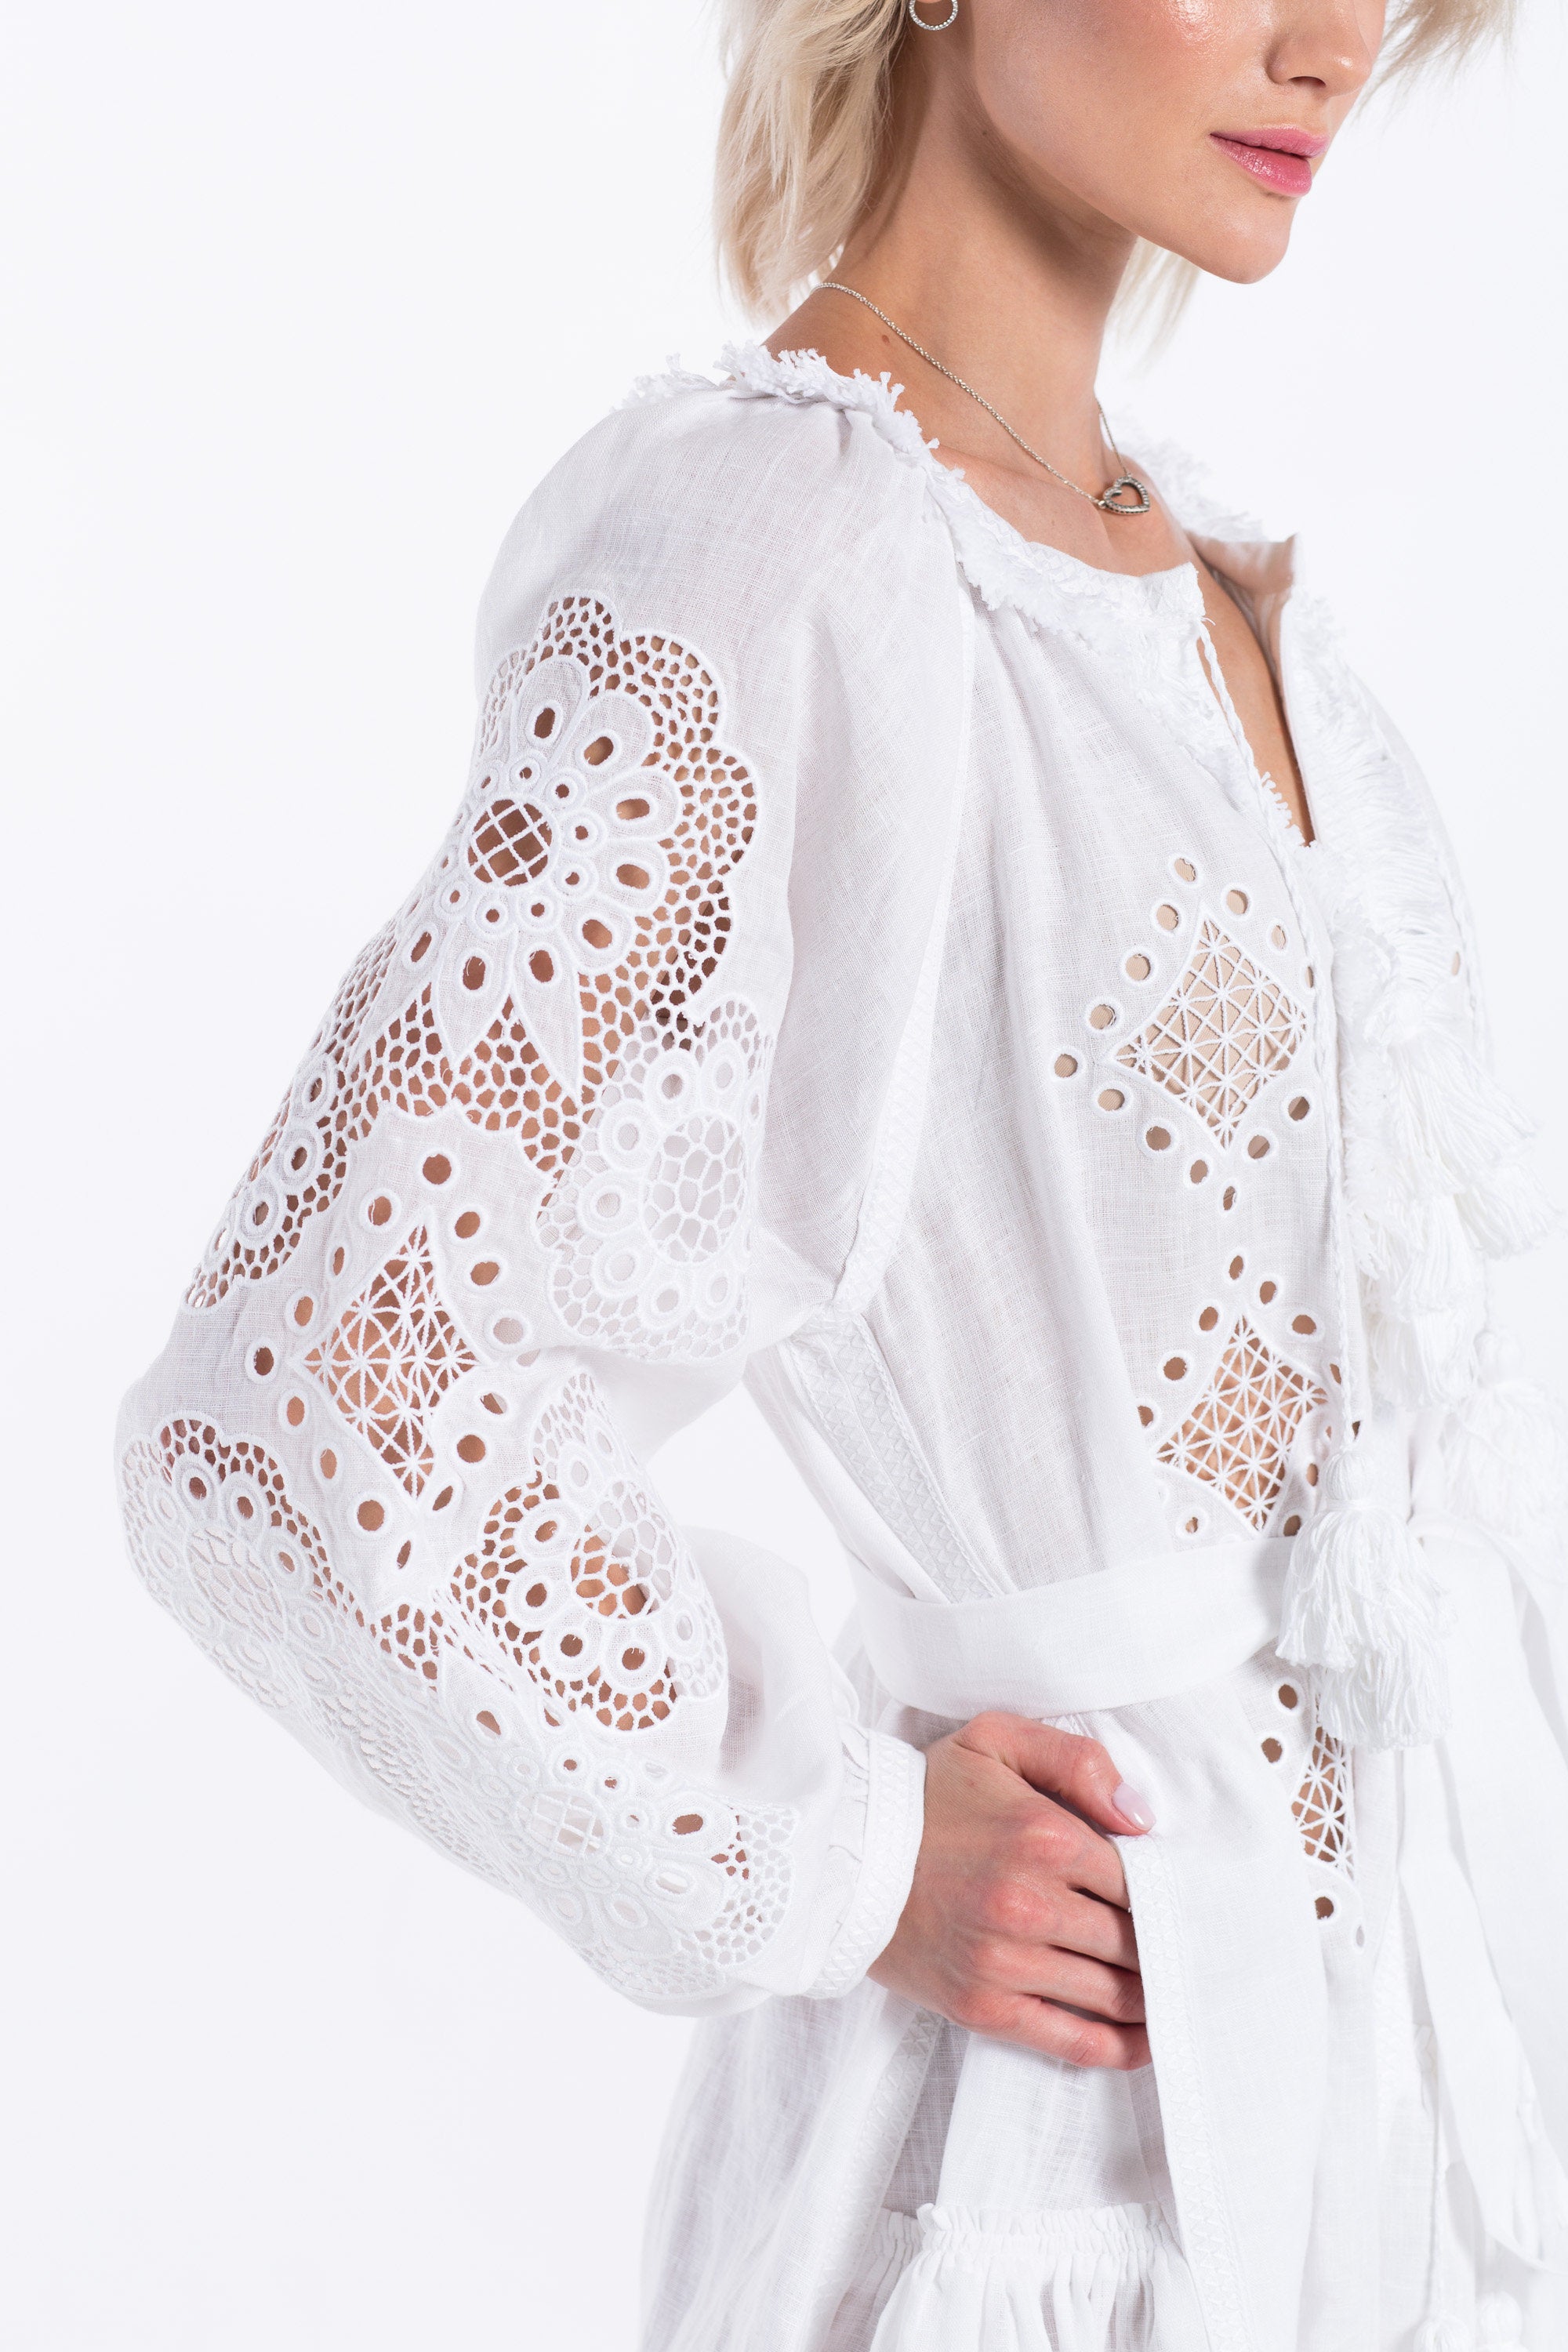 Richelieu embroidered wedding dress White bohemian outfit